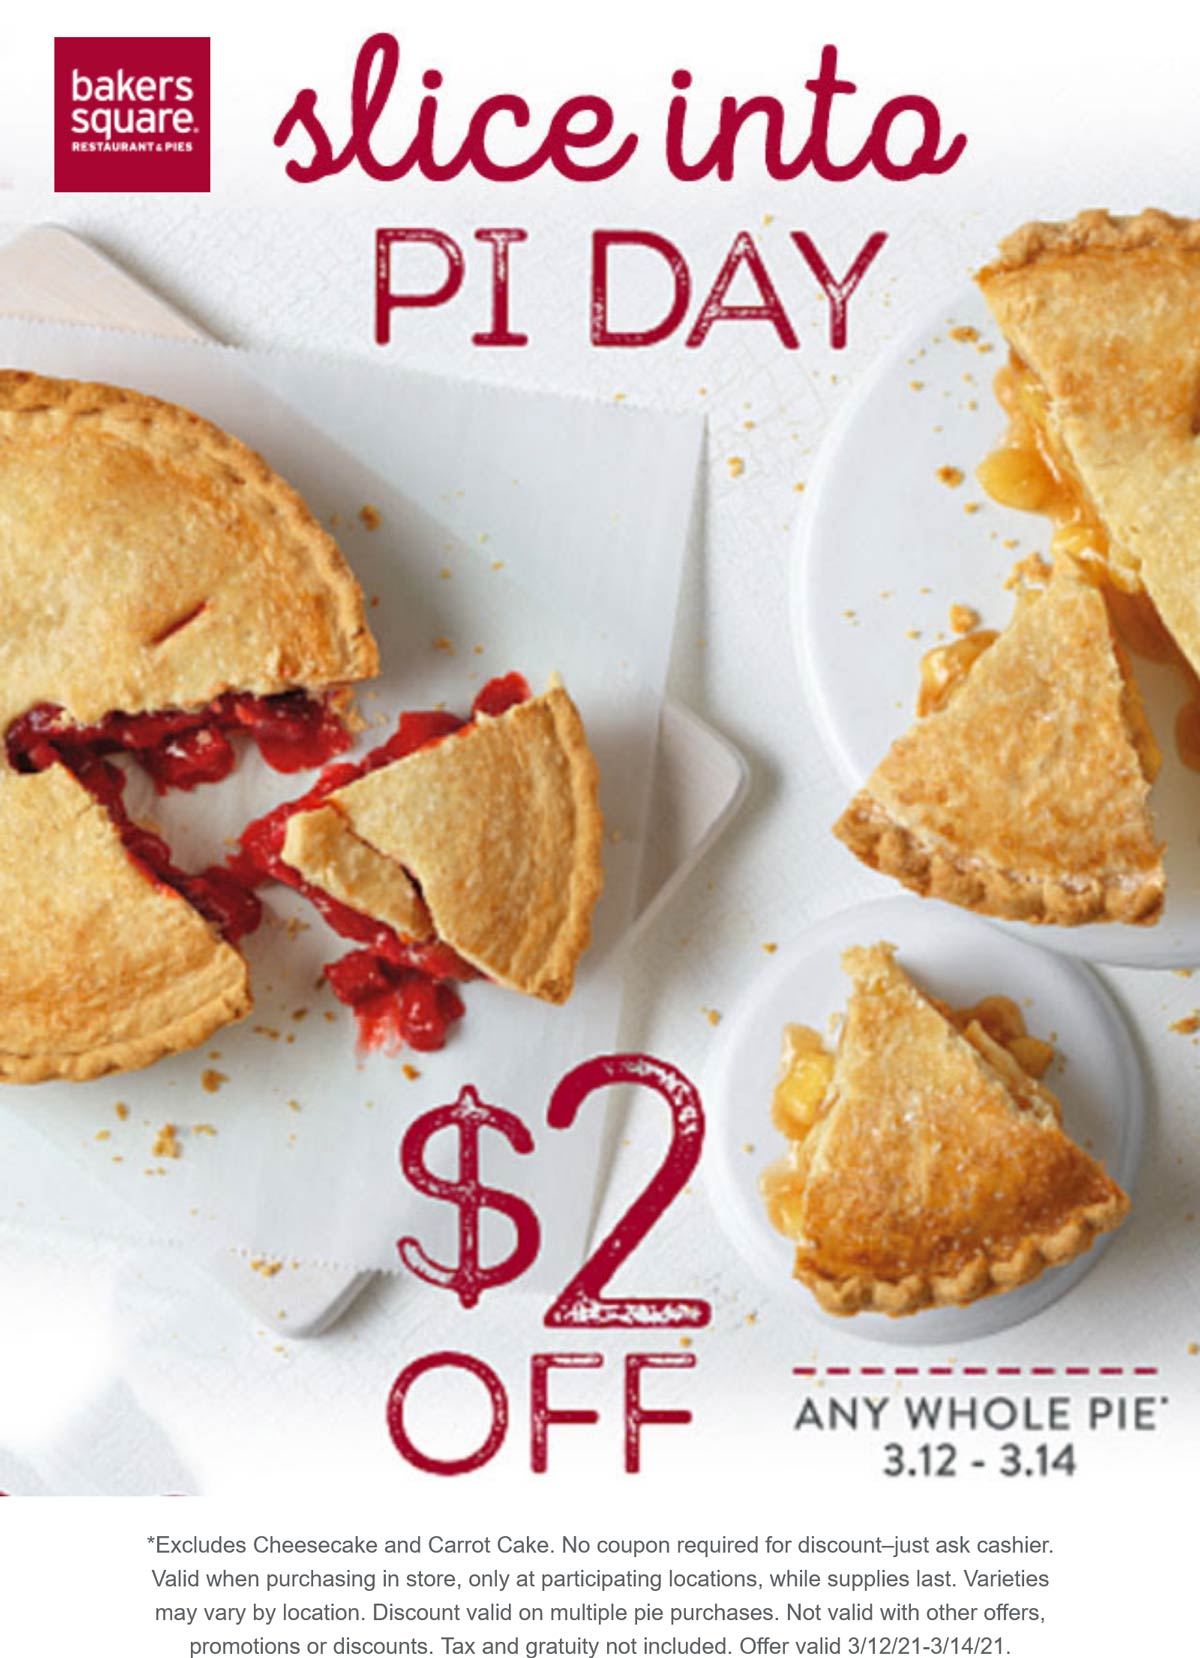 Bakers Square restaurants Coupon  $2 off any pie at Bakers Square restaurants #bakerssquare 